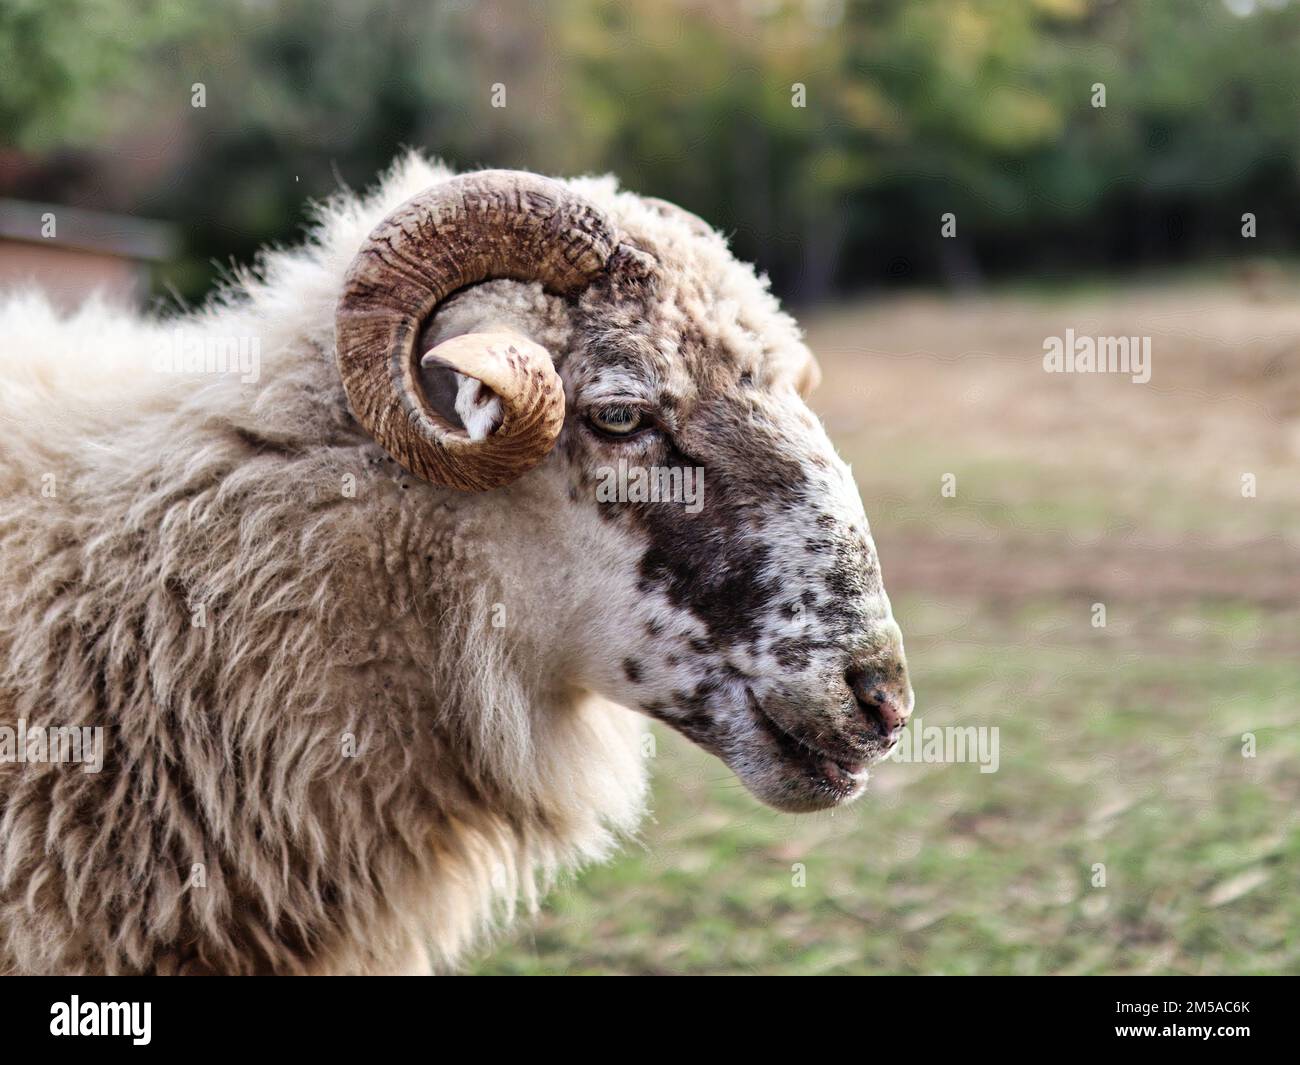 sheep portrait trees in background Stock Photo